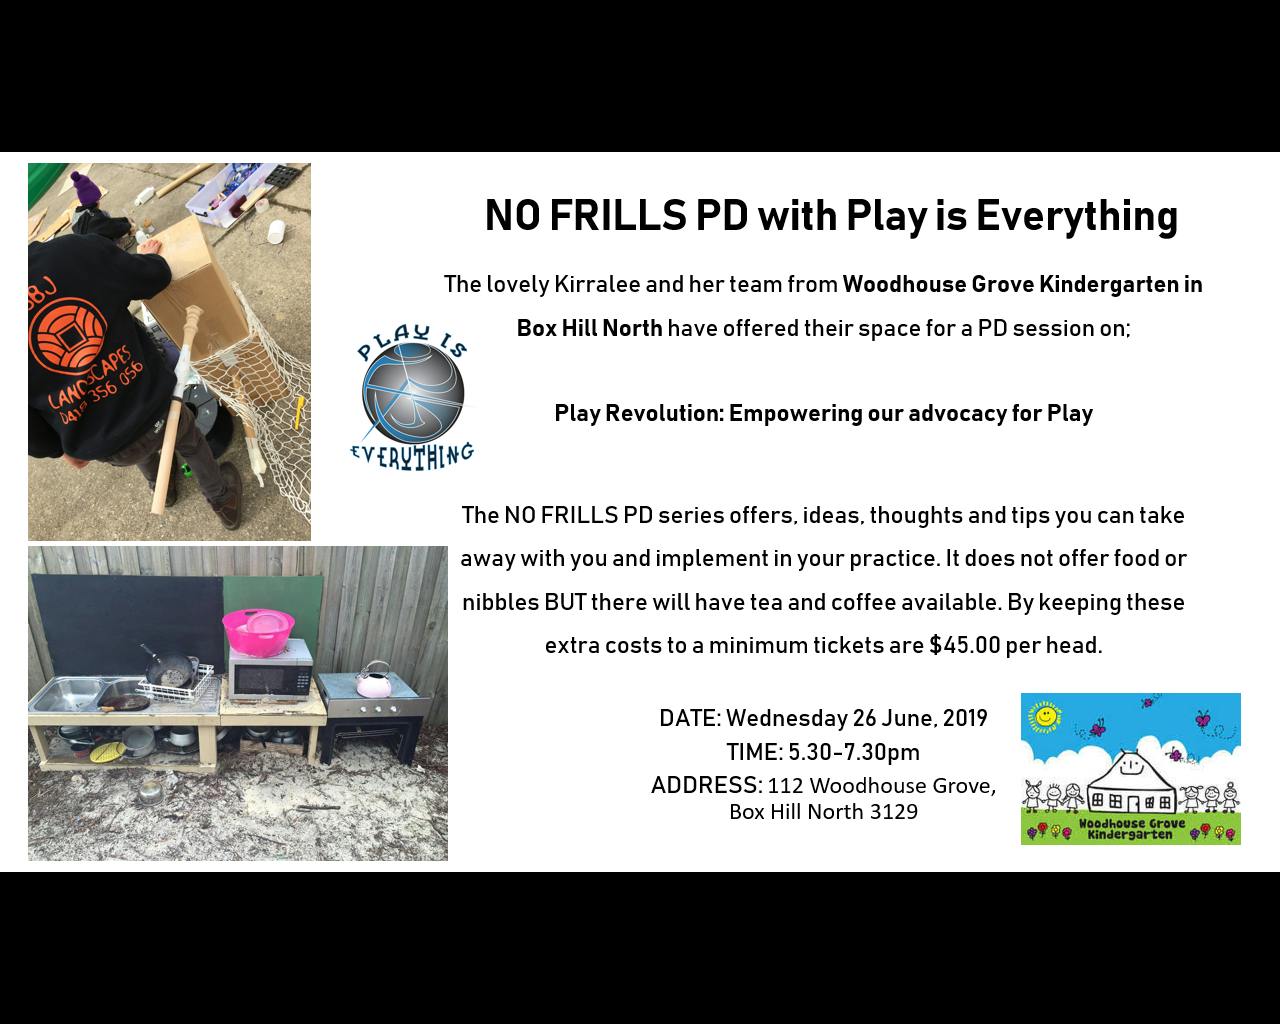 NO FRILLS PD WITH PLAY IS EVERYTHING IN BOX HILL NORTH